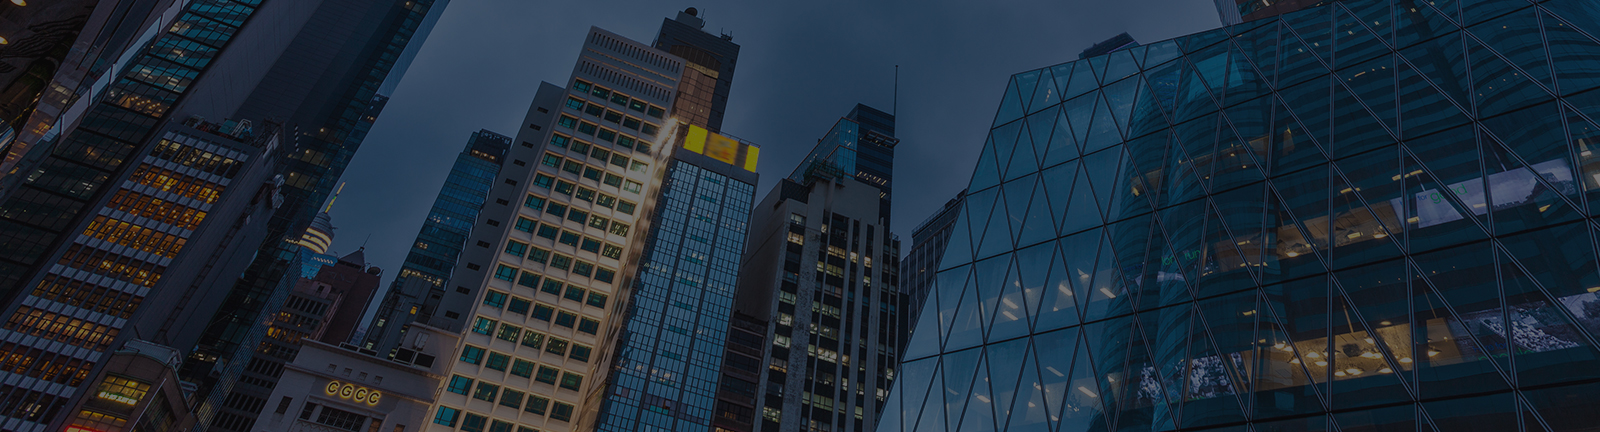 Role of risk management in CRE wealth creation | Acuity Knowledge Partners